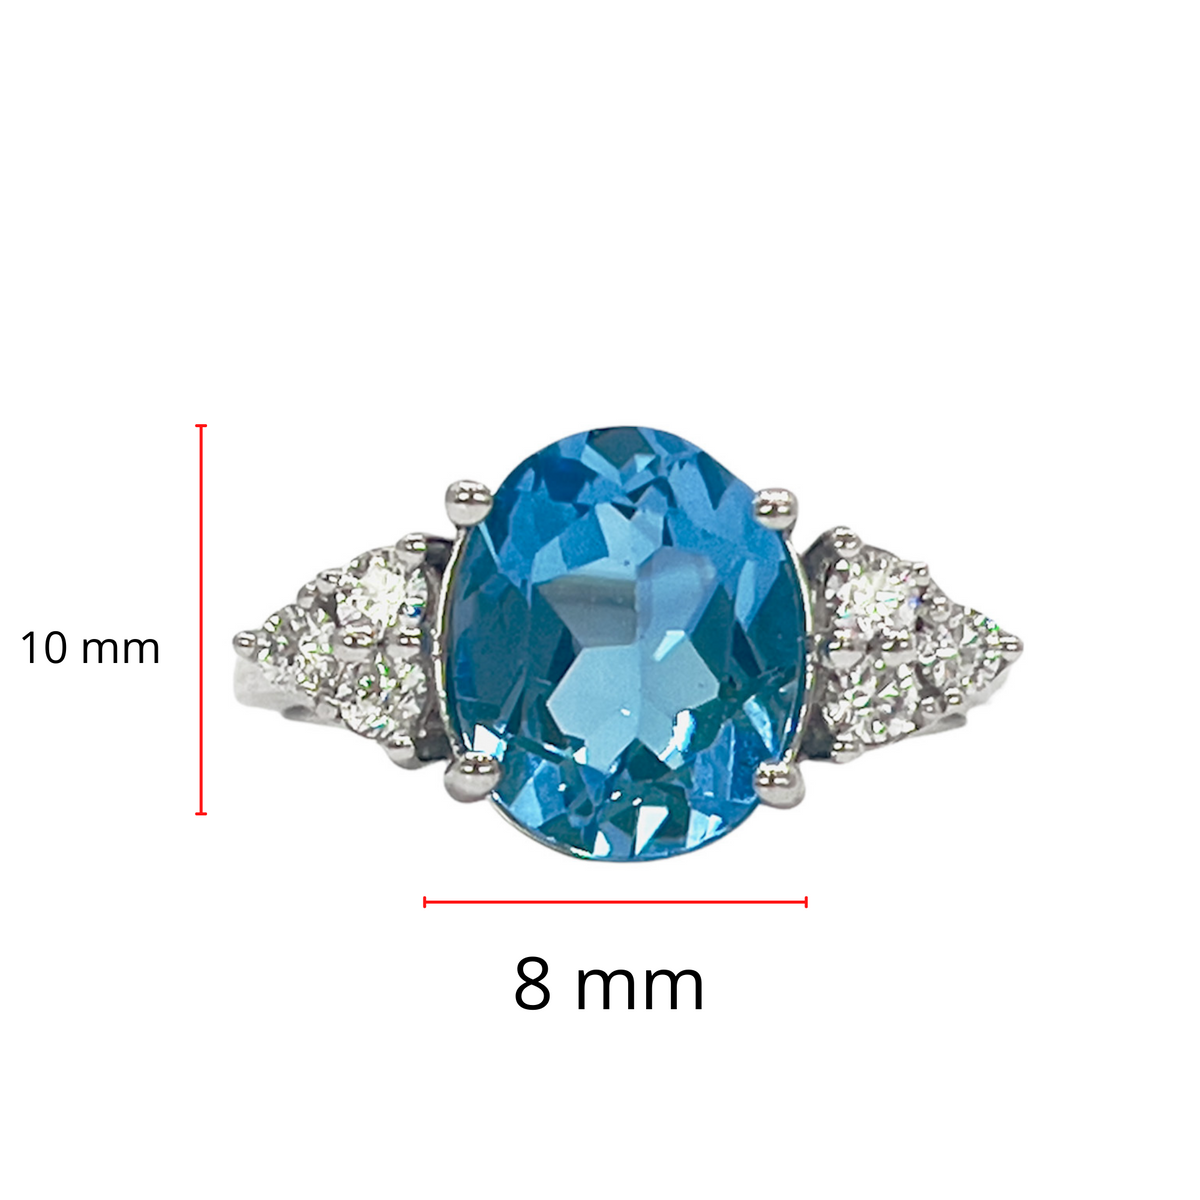 14K White Gold 10mm x 8mm Blue Topaz and 0.216cttw Canadian Diamond Ring